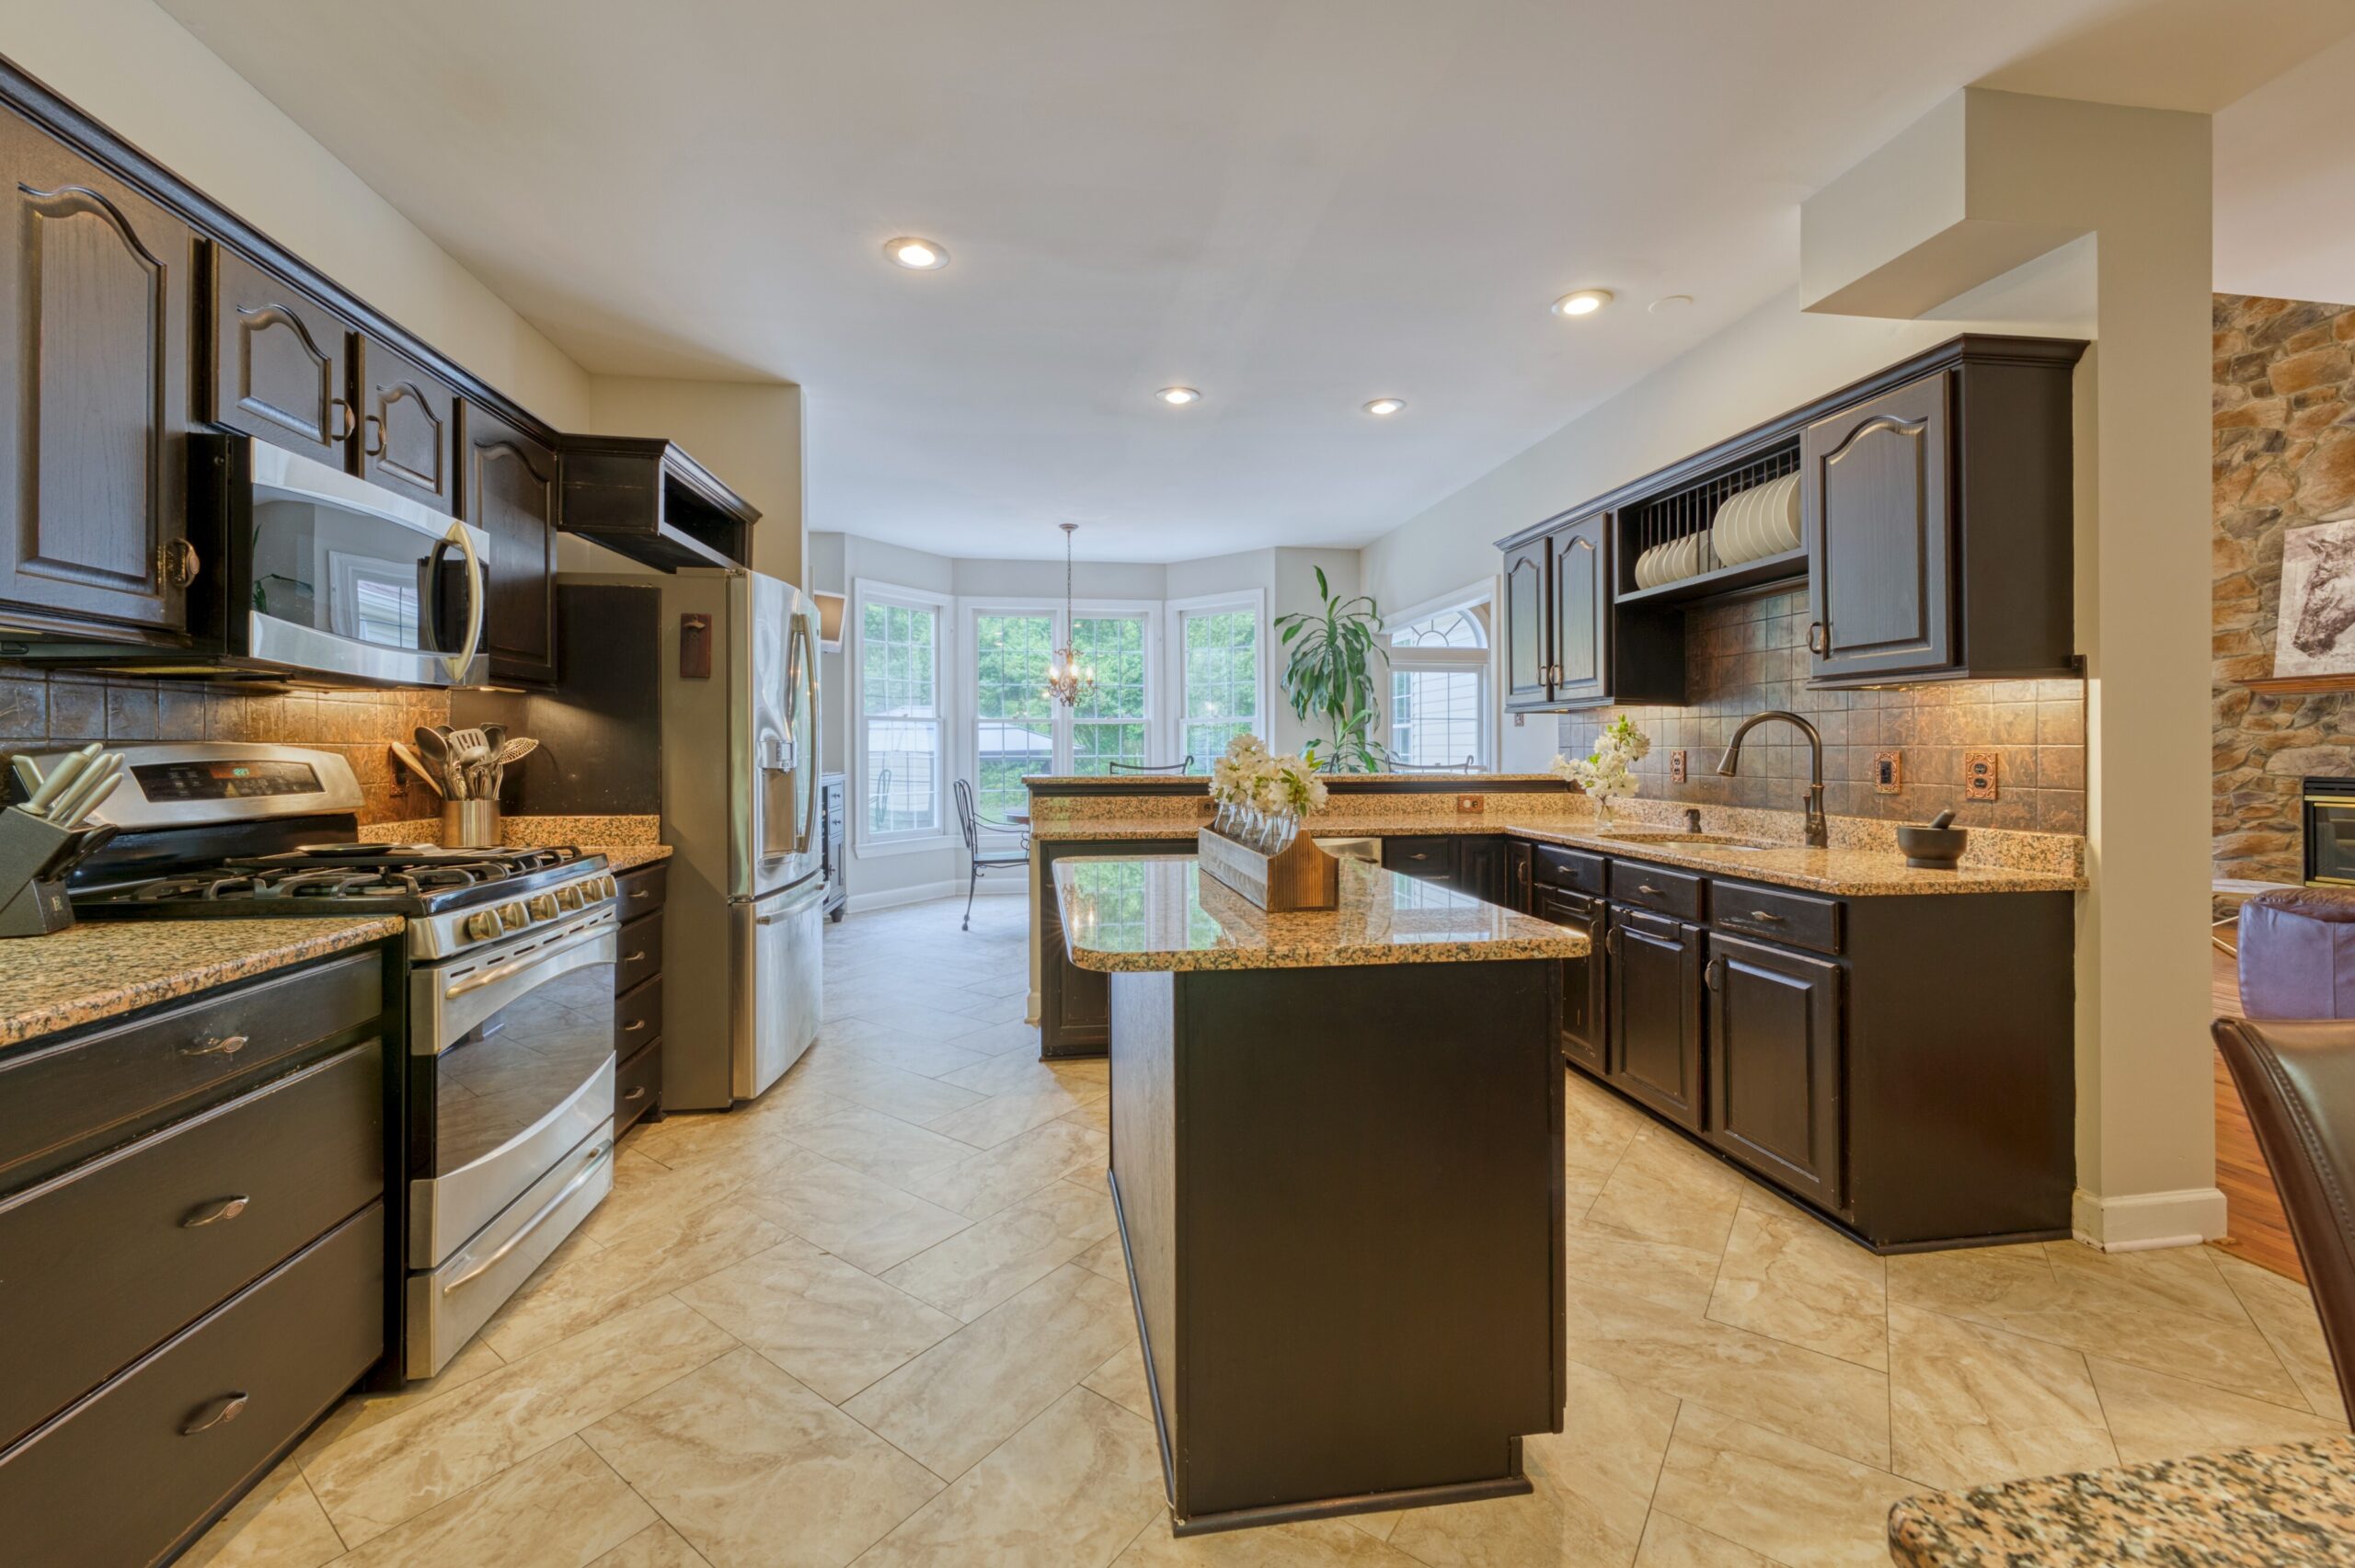 Professional interior photo of 13700 Holly Forest Dr - showing the kitchen with dark wood cabinets and cream colored granite and an island